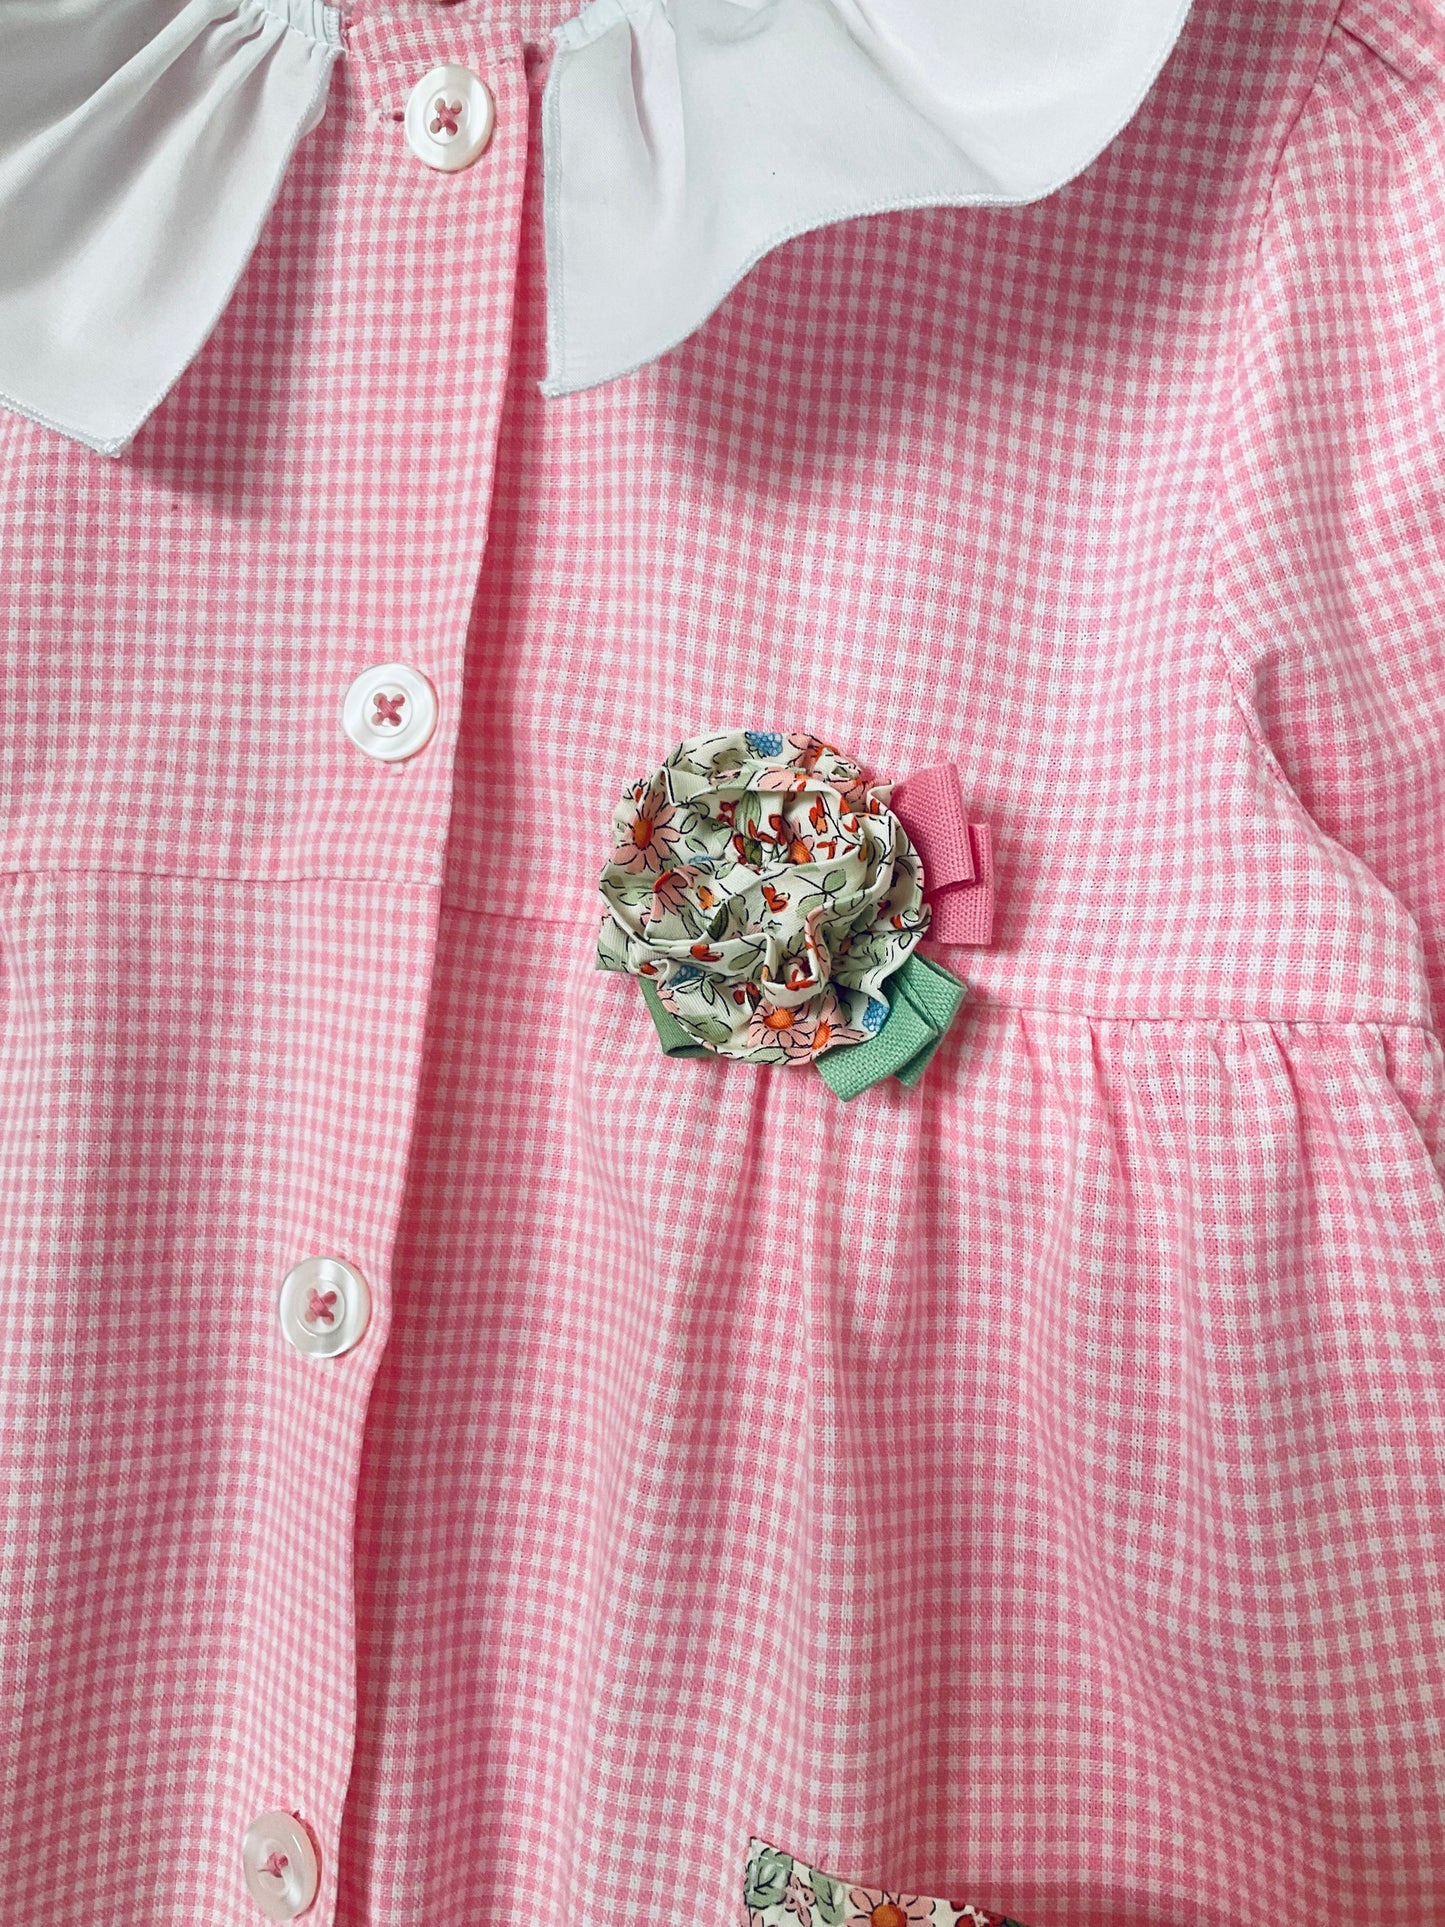 The apron of flowers - Pink checkered apron for kindergarten with pockets with flowers